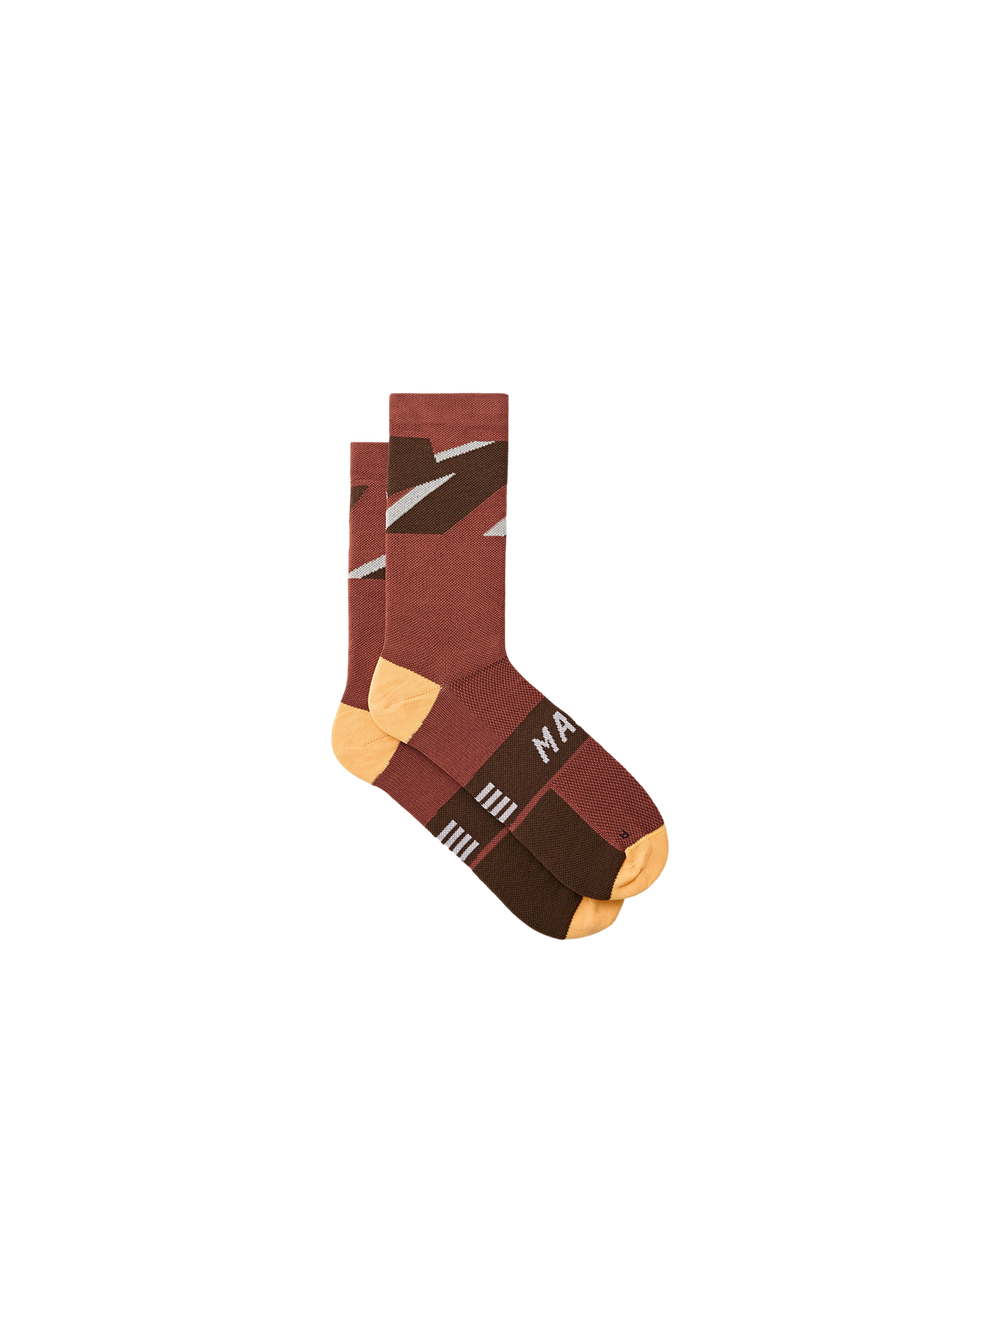 Product Image for Evolve 3D Sock